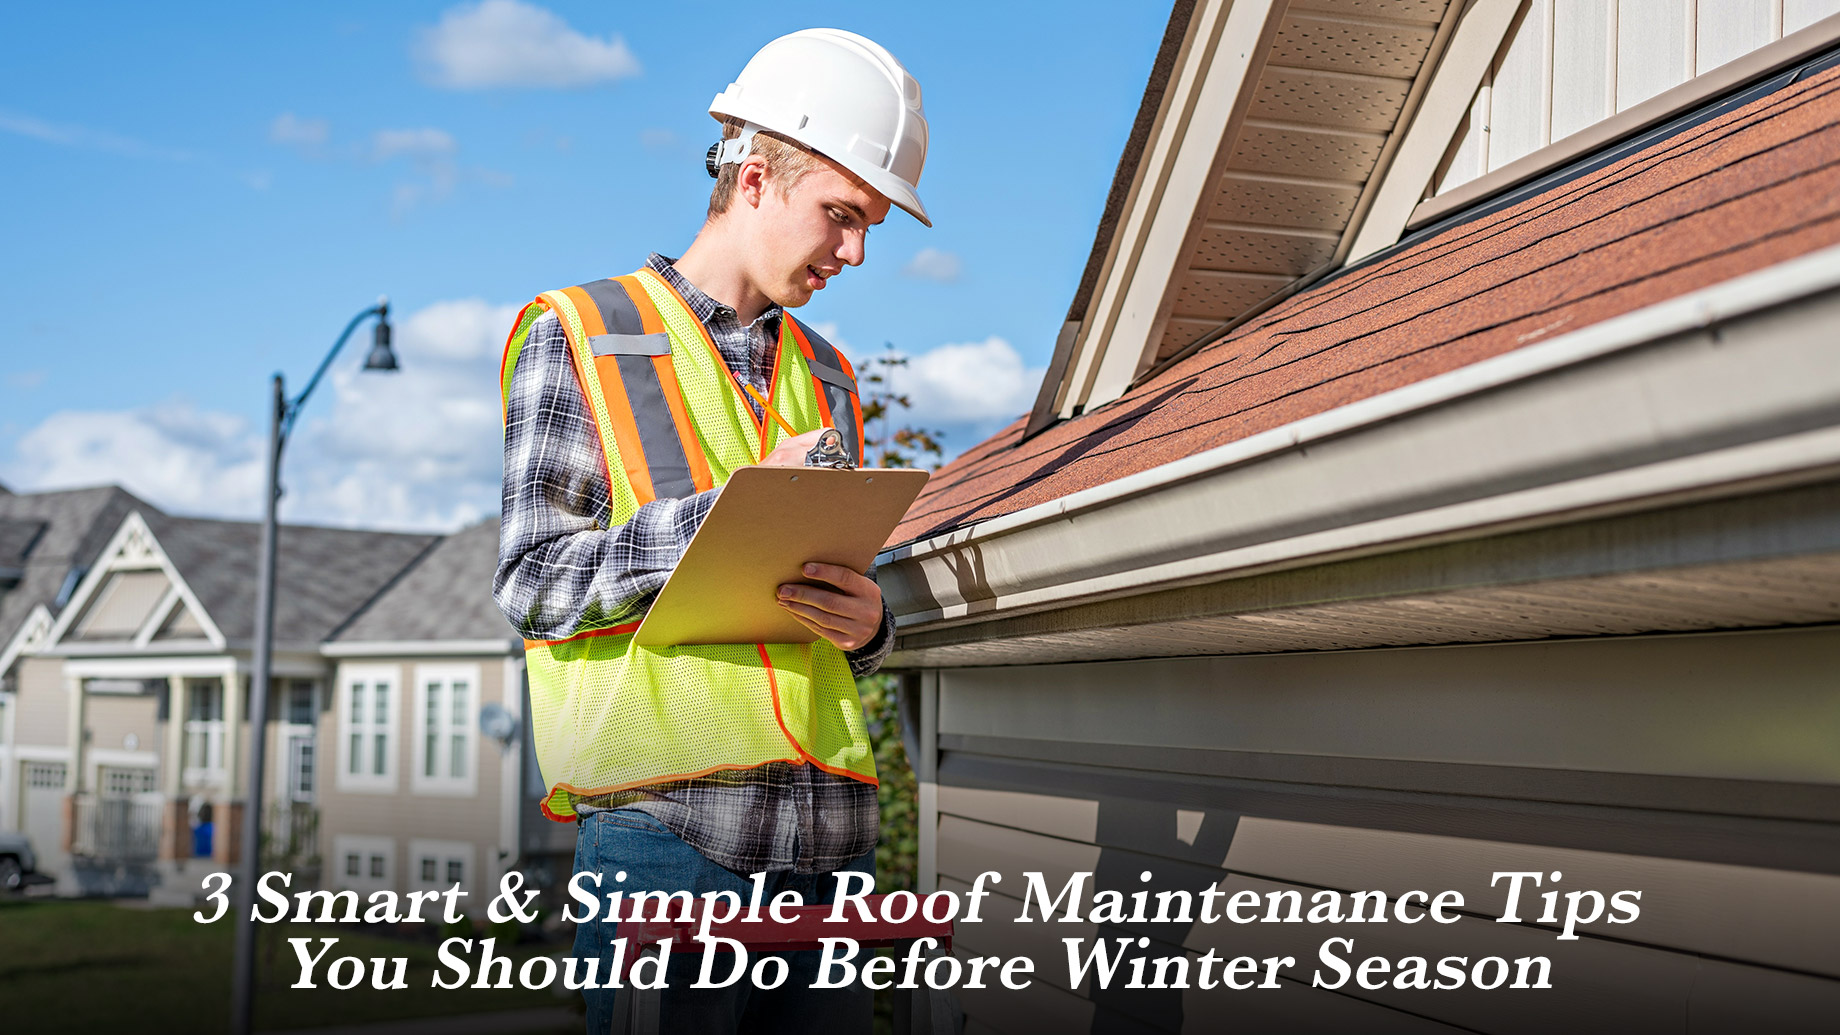 3 Smart & Simple Roof Maintenance Tips You Should Do Before Winter Season